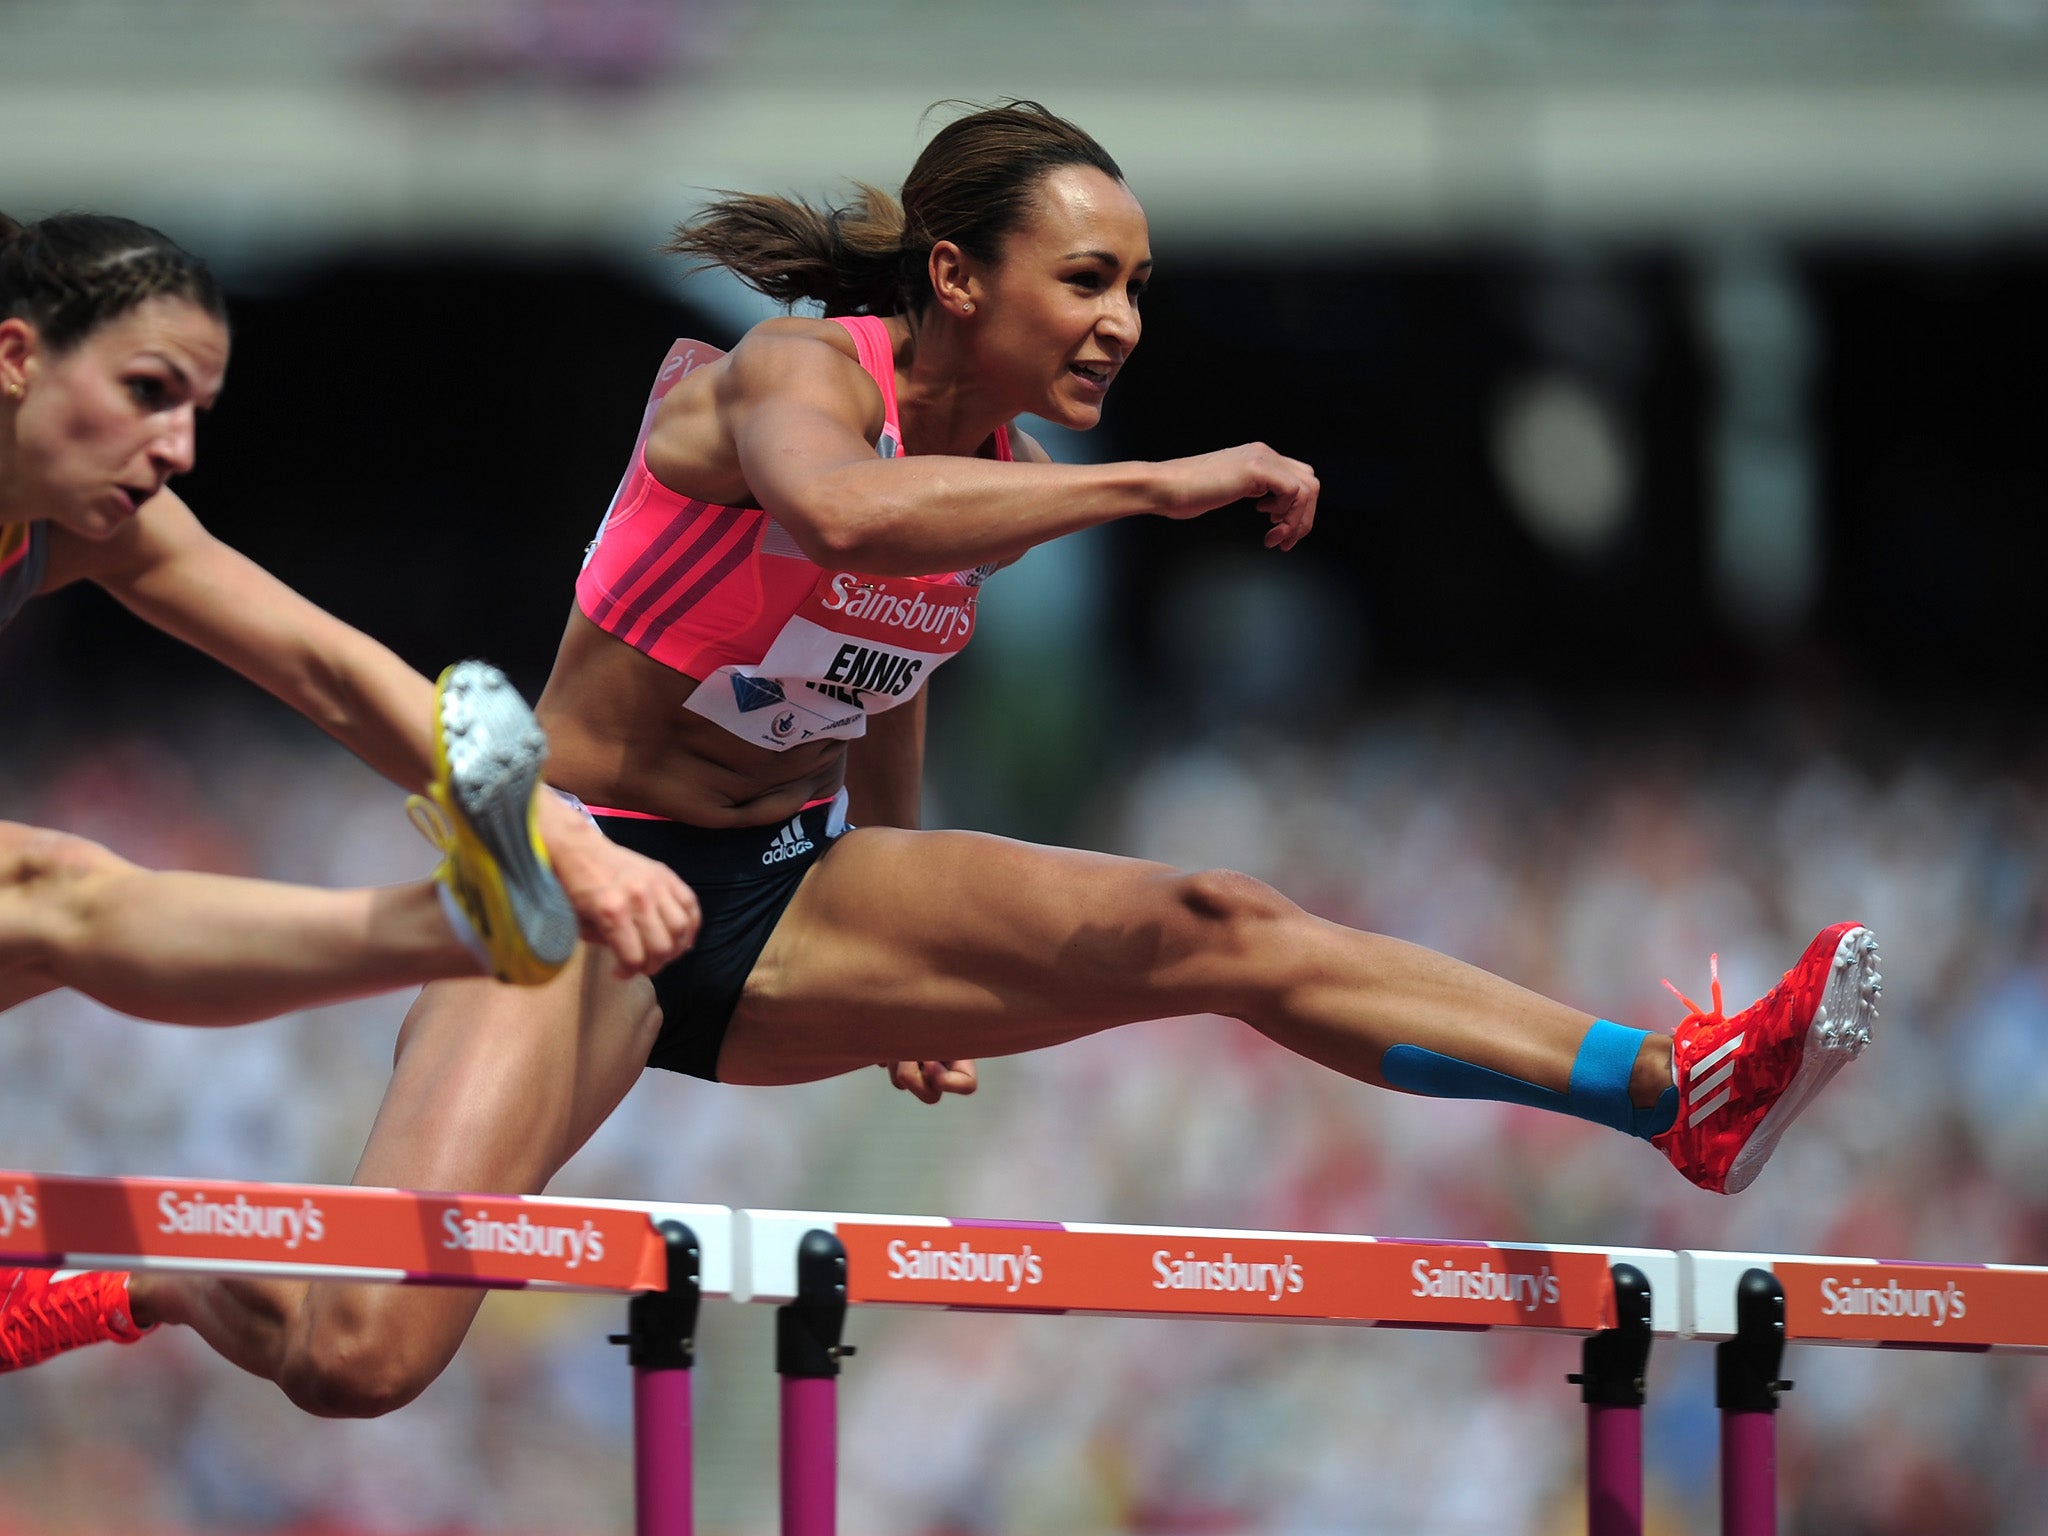 Jessica Ennis-Hill finishes fourth in the Anniversary Games 100m hurdles in July 2013 – the last time the public saw her in competition